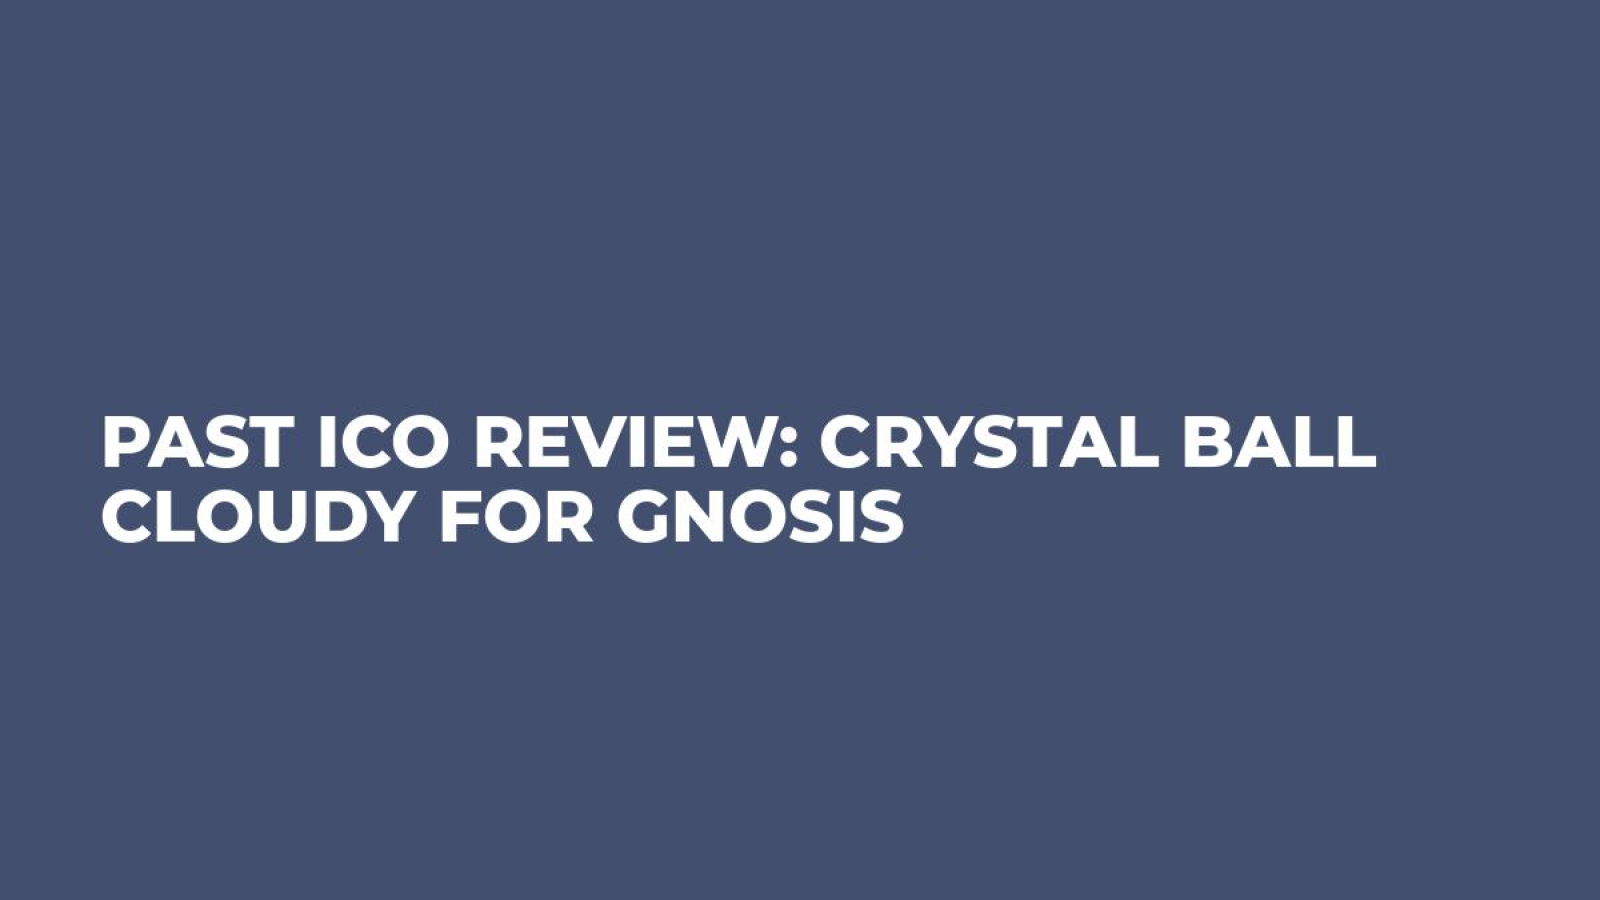 Past ICO Review: Crystal Ball Cloudy For Gnosis